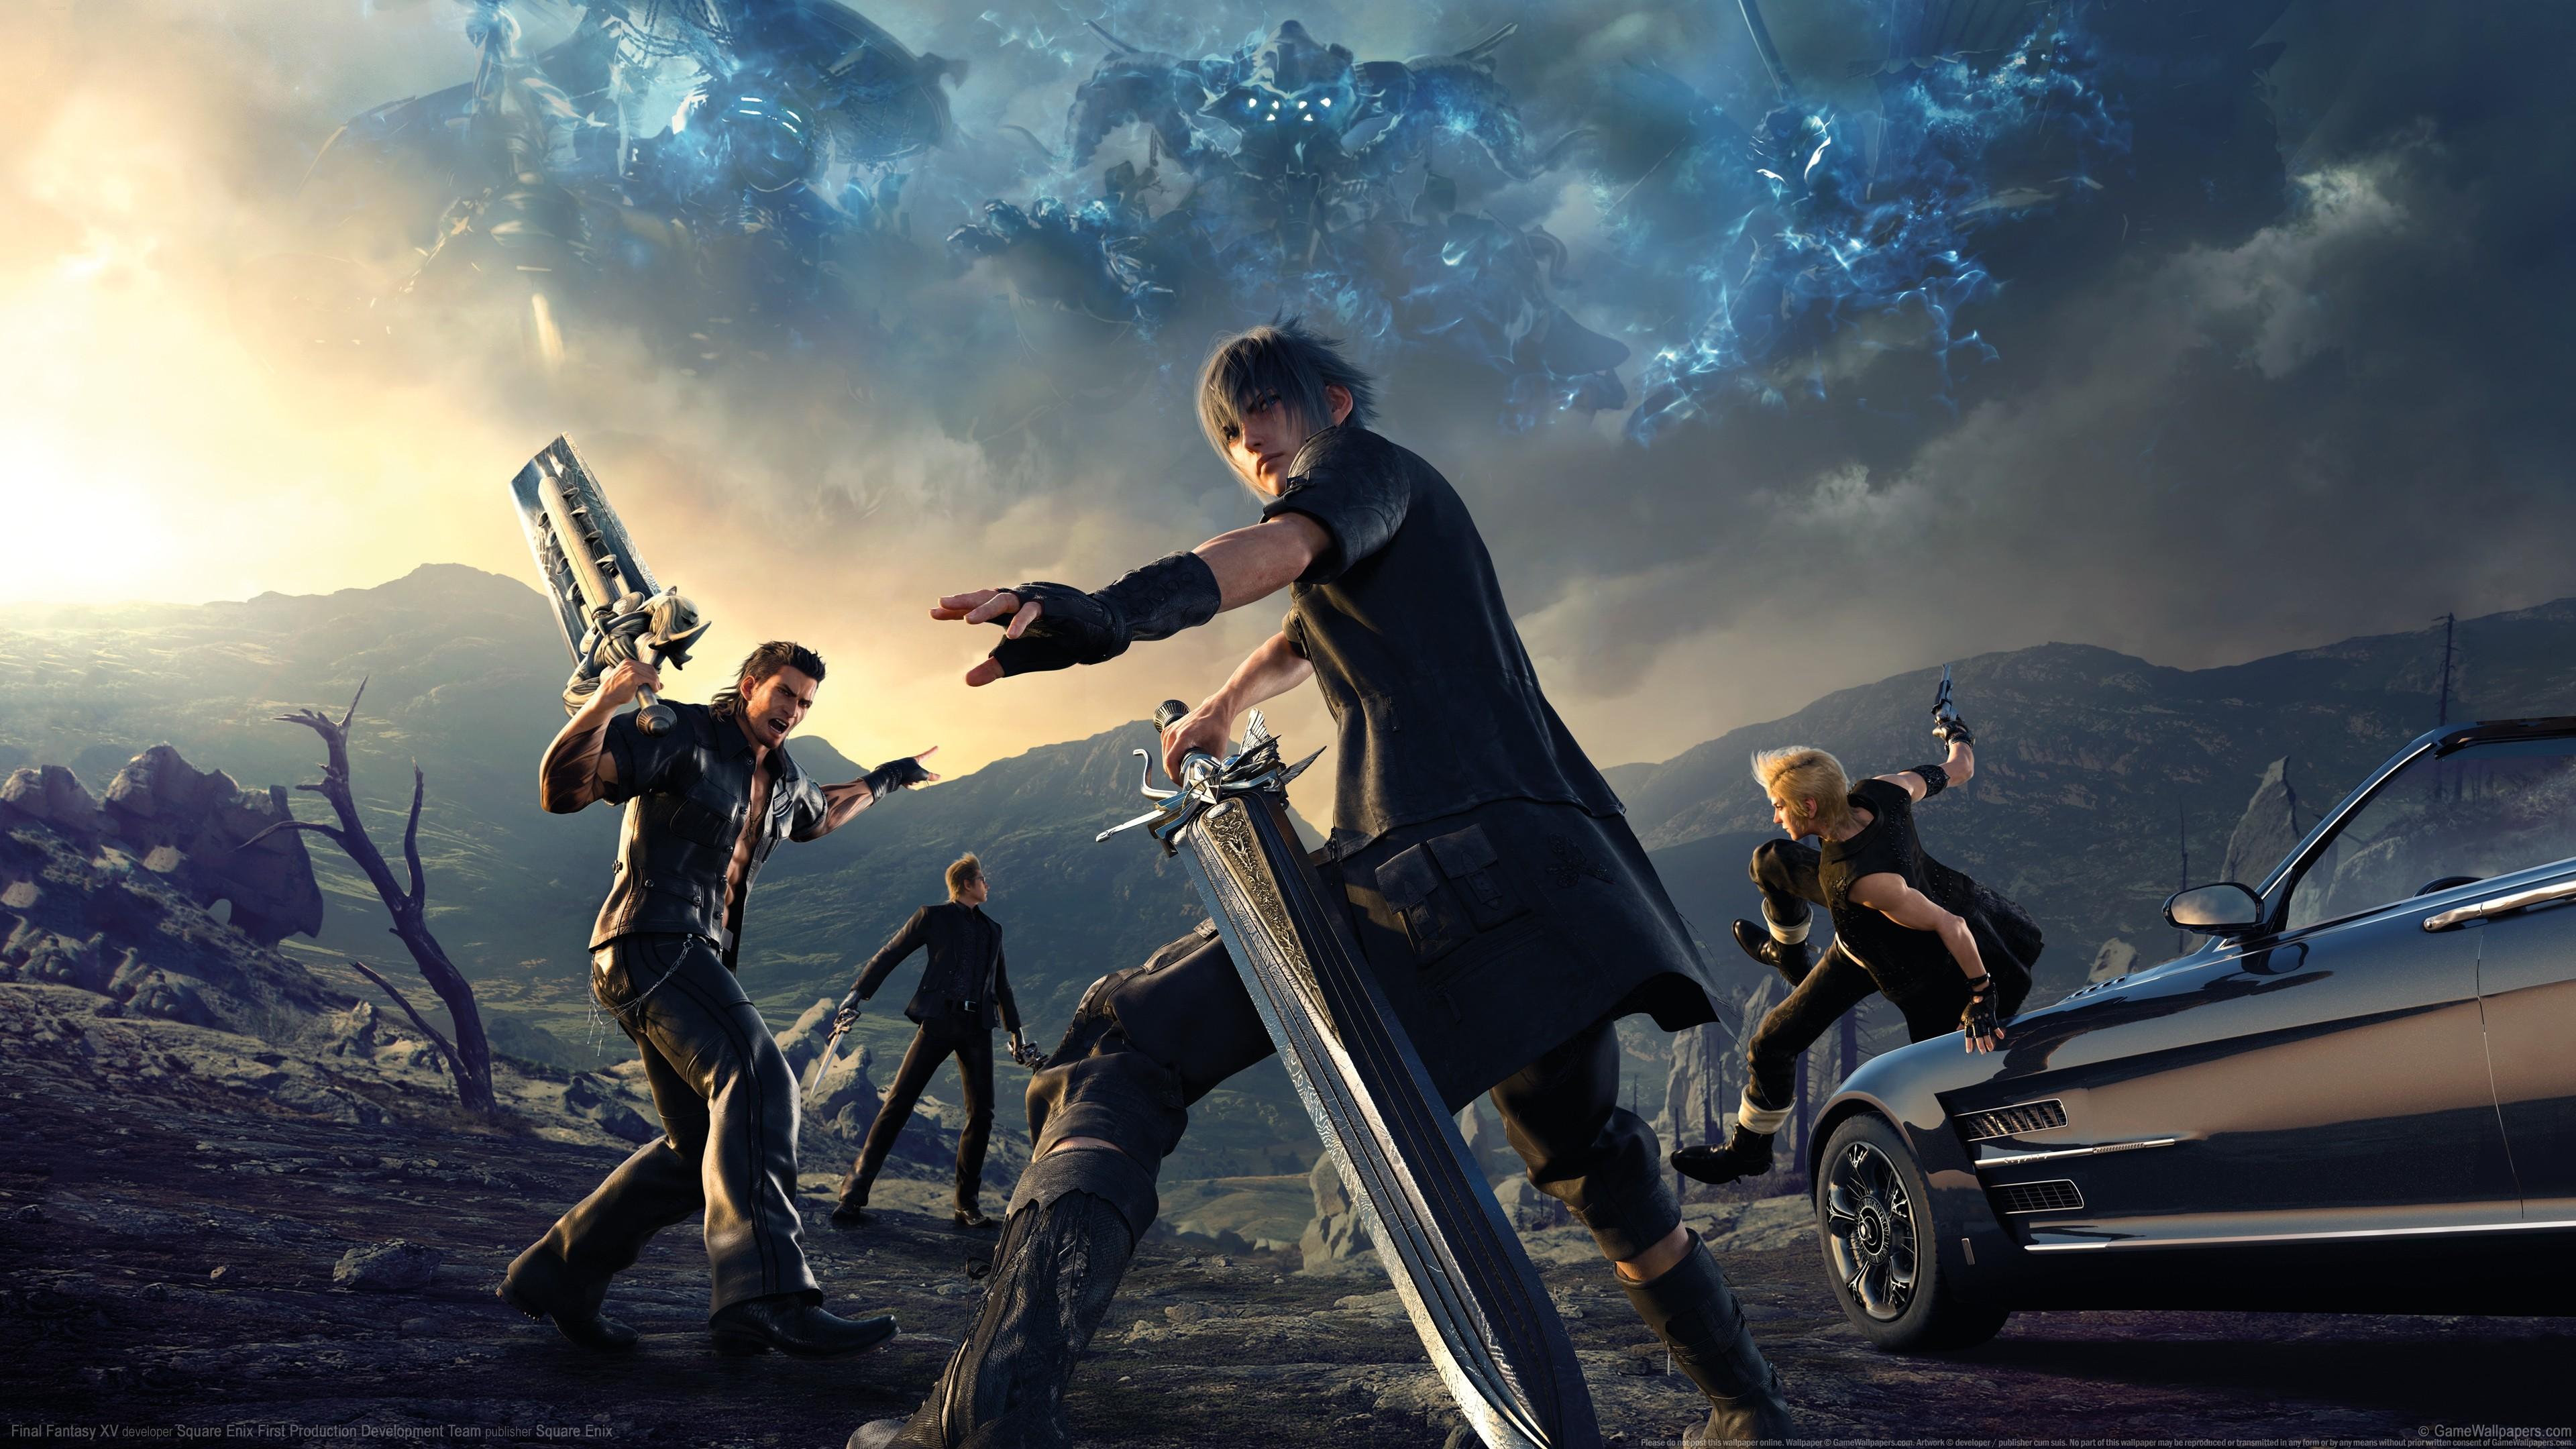 3840 x 2160 · jpeg - Final Fantasy XV PS4, HD Games, 4k Wallpapers, Images, Backgrounds ...